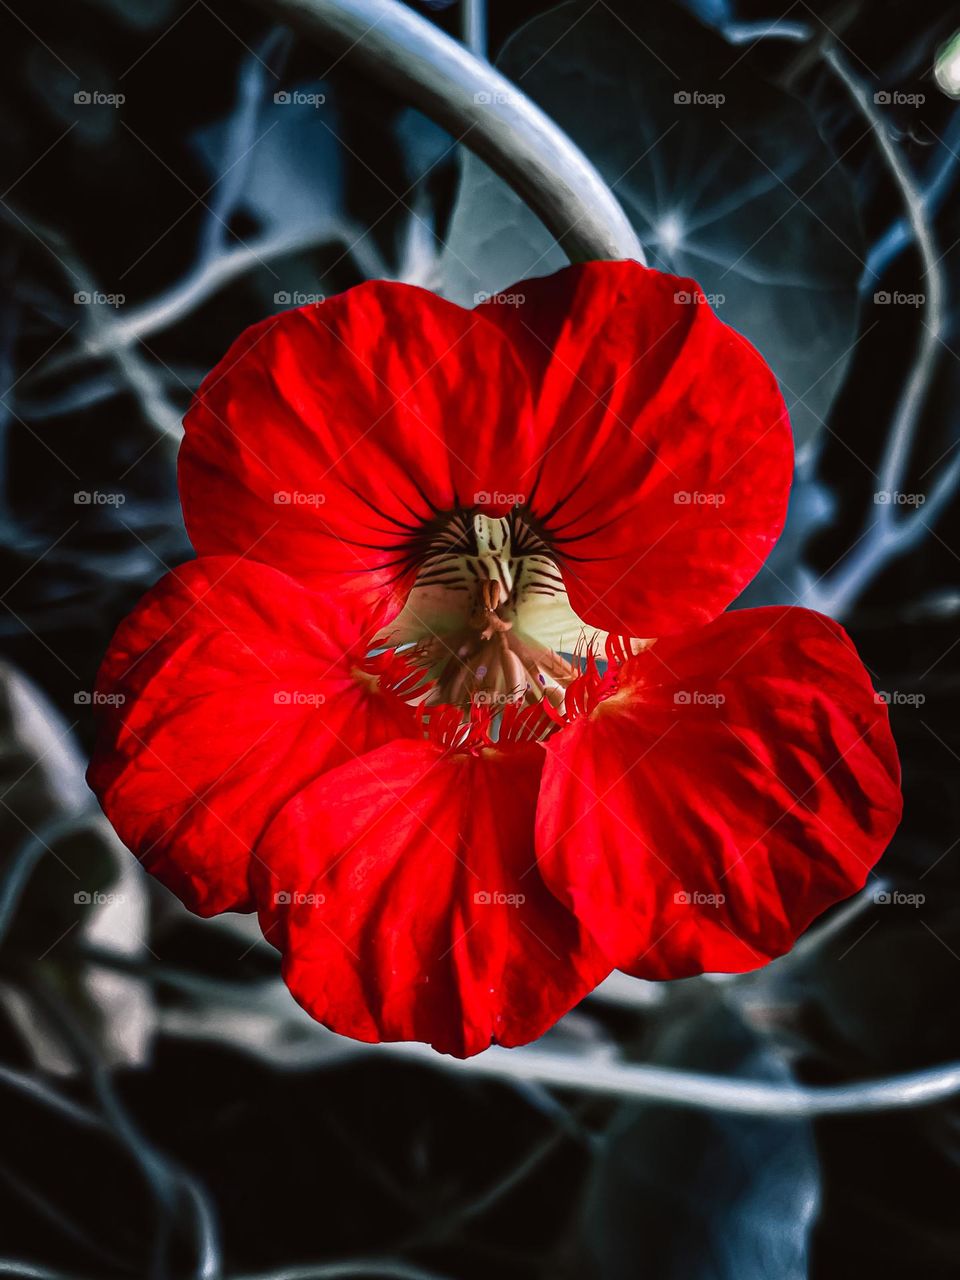 Bright red flower plant mother nature vibrant art artsy life edited phone photography photo picture image  detailed beautiful cool different nature dark background moody vibes flower colour color colorful pop popping living flowers vines 